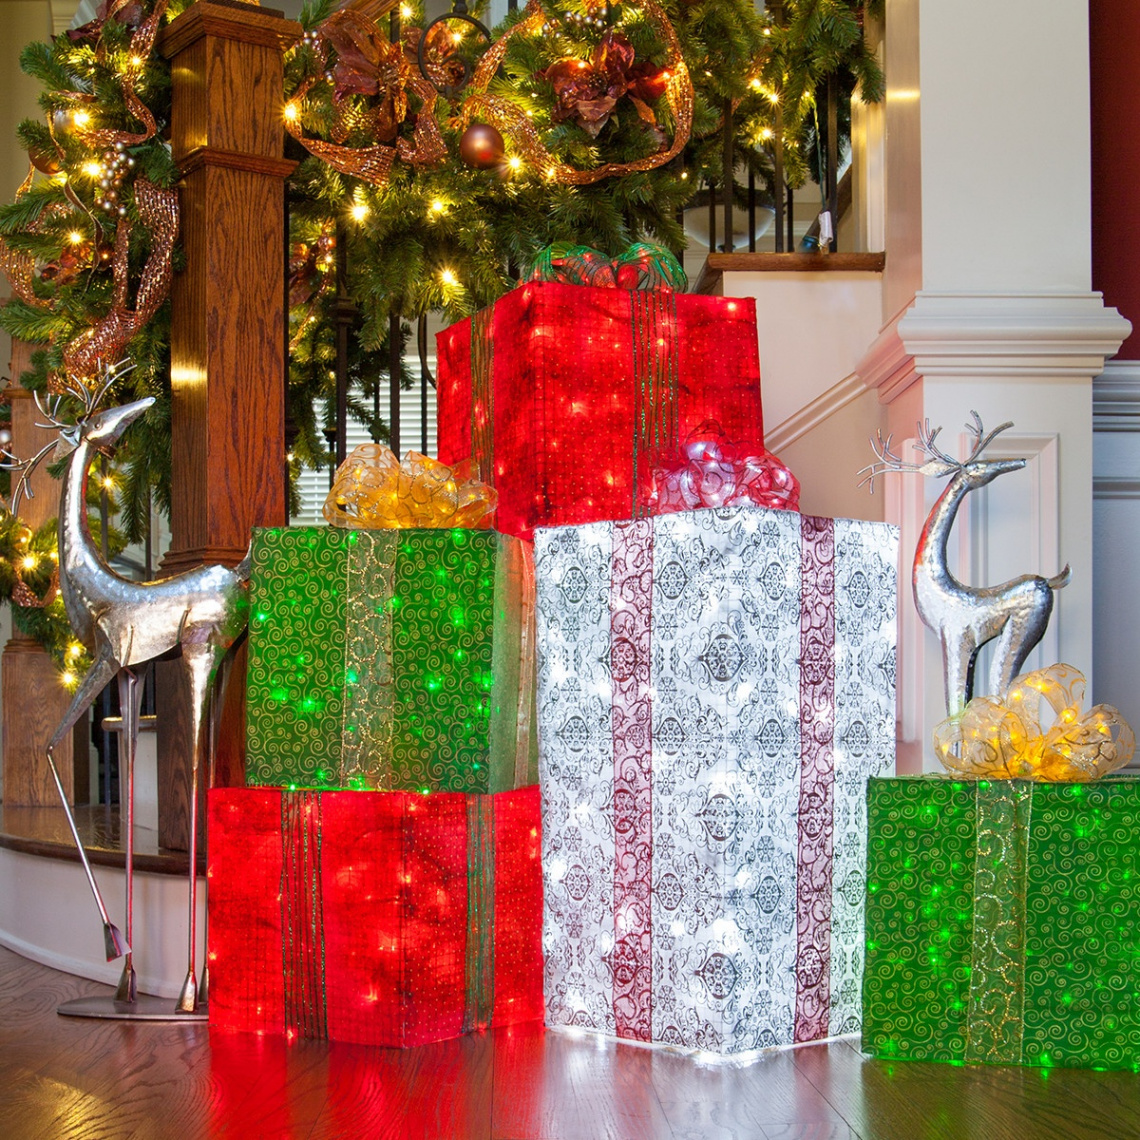 DIY Christmas Decorations -  Lighted Gift Boxes